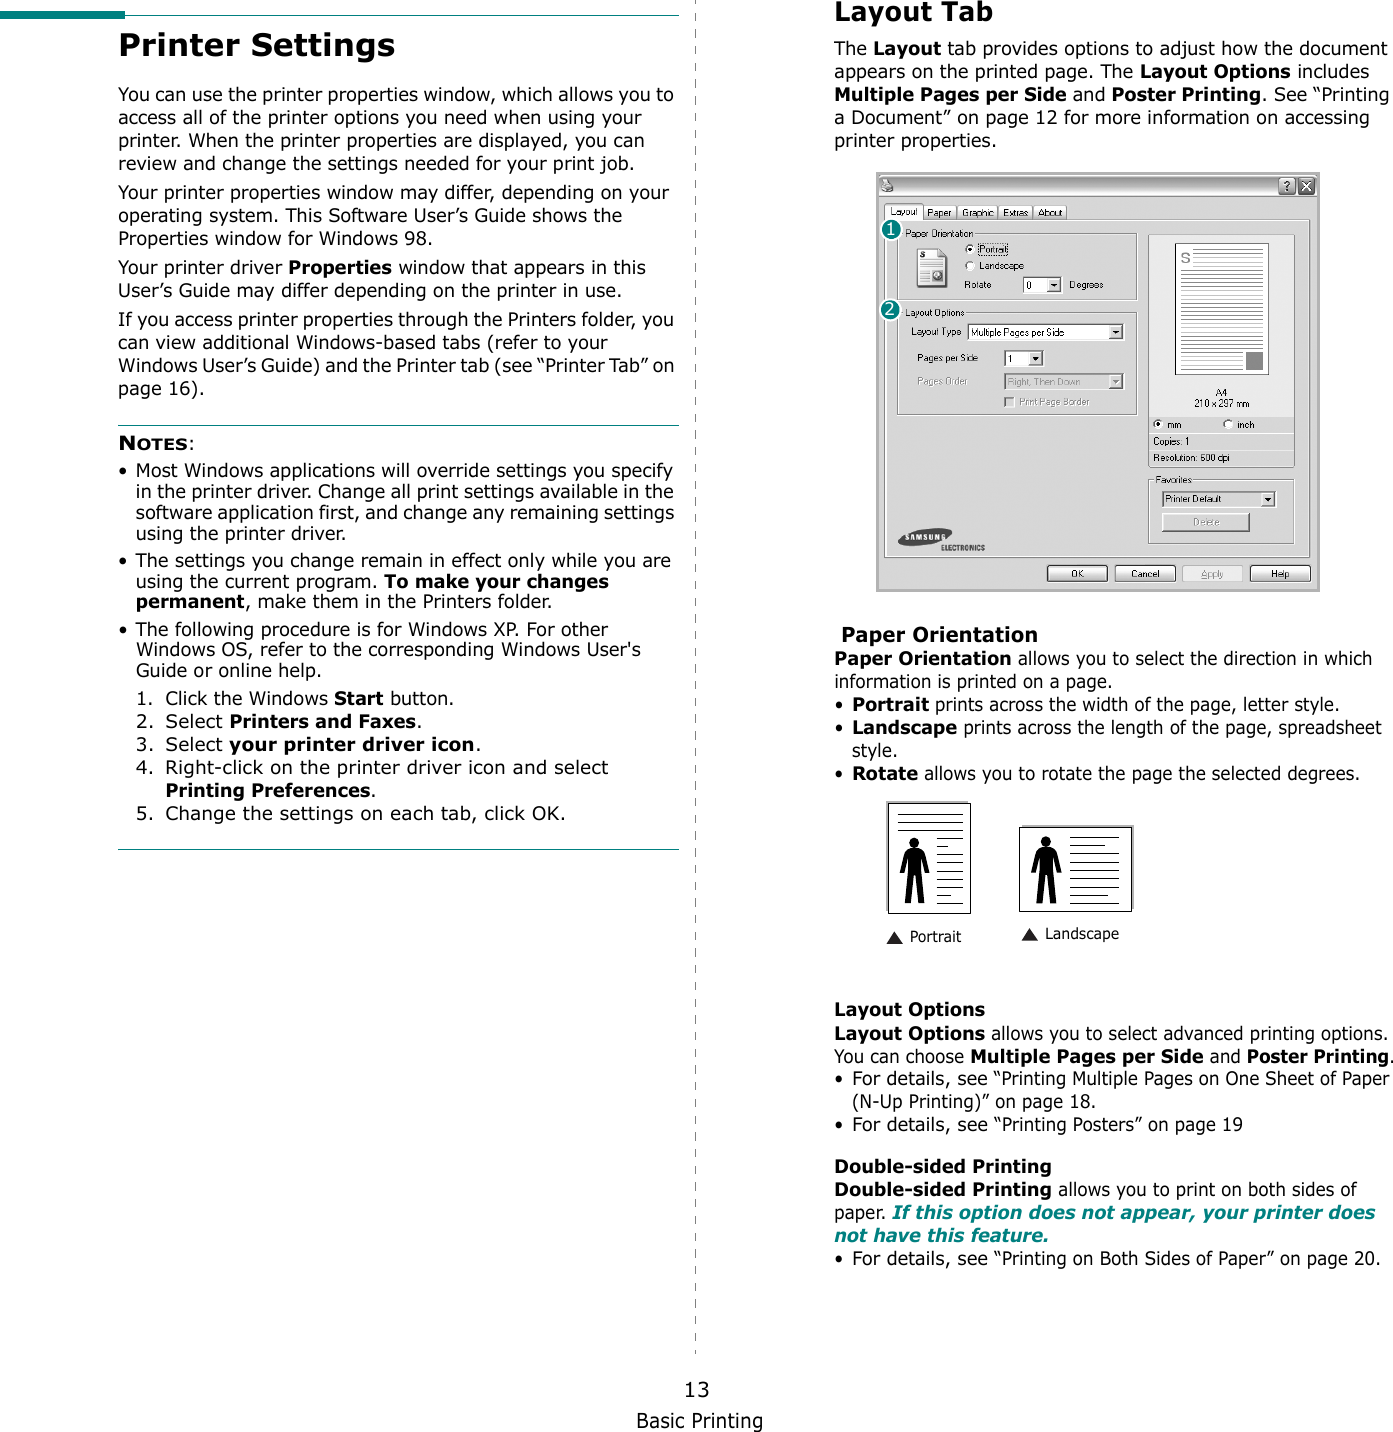 Basic Printing13Printer SettingsYou can use the printer properties window, which allows you to access all of the printer options you need when using your printer. When the printer properties are displayed, you can review and change the settings needed for your print job. Your printer properties window may differ, depending on your operating system. This Software User’s Guide shows the Properties window for Windows 98.Your printer driver Properties window that appears in this User’s Guide may differ depending on the printer in use.If you access printer properties through the Printers folder, you can view additional Windows-based tabs (refer to your Windows User’s Guide) and the Printer tab (see “Printer Tab” on page 16).NOTES:• Most Windows applications will override settings you specify in the printer driver. Change all print settings available in the software application first, and change any remaining settings using the printer driver. • The settings you change remain in effect only while you are using the current program. To make your changes permanent, make them in the Printers folder. • The following procedure is for Windows XP. For other Windows OS, refer to the corresponding Windows User&apos;s Guide or online help.1. Click the Windows Start button.2. Select Printers and Faxes.3. Select your printer driver icon.4. Right-click on the printer driver icon and select Printing Preferences.5. Change the settings on each tab, click OK.Layout TabThe Layout tab provides options to adjust how the document appears on the printed page. The Layout Options includes Multiple Pages per Side and Poster Printing. See “Printing a Document” on page 12 for more information on accessing printer properties.   Paper OrientationPaper Orientation allows you to select the direction in which information is printed on a page. •Portrait prints across the width of the page, letter style. •Landscape prints across the length of the page, spreadsheet style. •Rotate allows you to rotate the page the selected degrees.Layout OptionsLayout Options allows you to select advanced printing options. You can choose Multiple Pages per Side and Poster Printing.•For details, see “Printing Multiple Pages on One Sheet of Paper (N-Up Printing)” on page 18.•For details, see “Printing Posters” on page 19Double-sided PrintingDouble-sided Printing allows you to print on both sides of paper. If this option does not appear, your printer does not have this feature.•For details, see “Printing on Both Sides of Paper” on page 20.12 Landscape Portrait